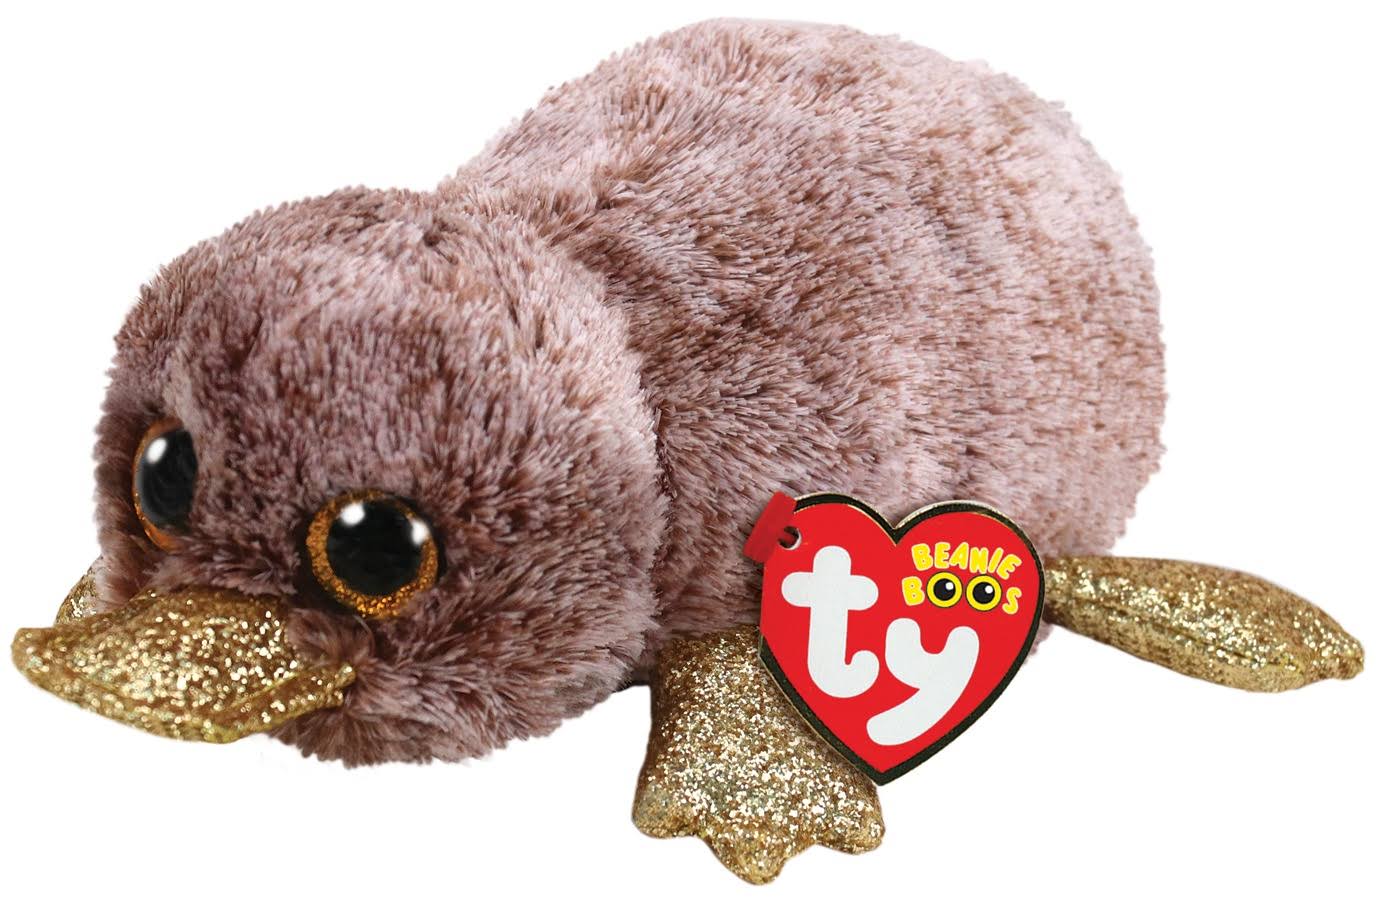 Ty Beanie Platypus Plush Toy - Boo Brown, Small